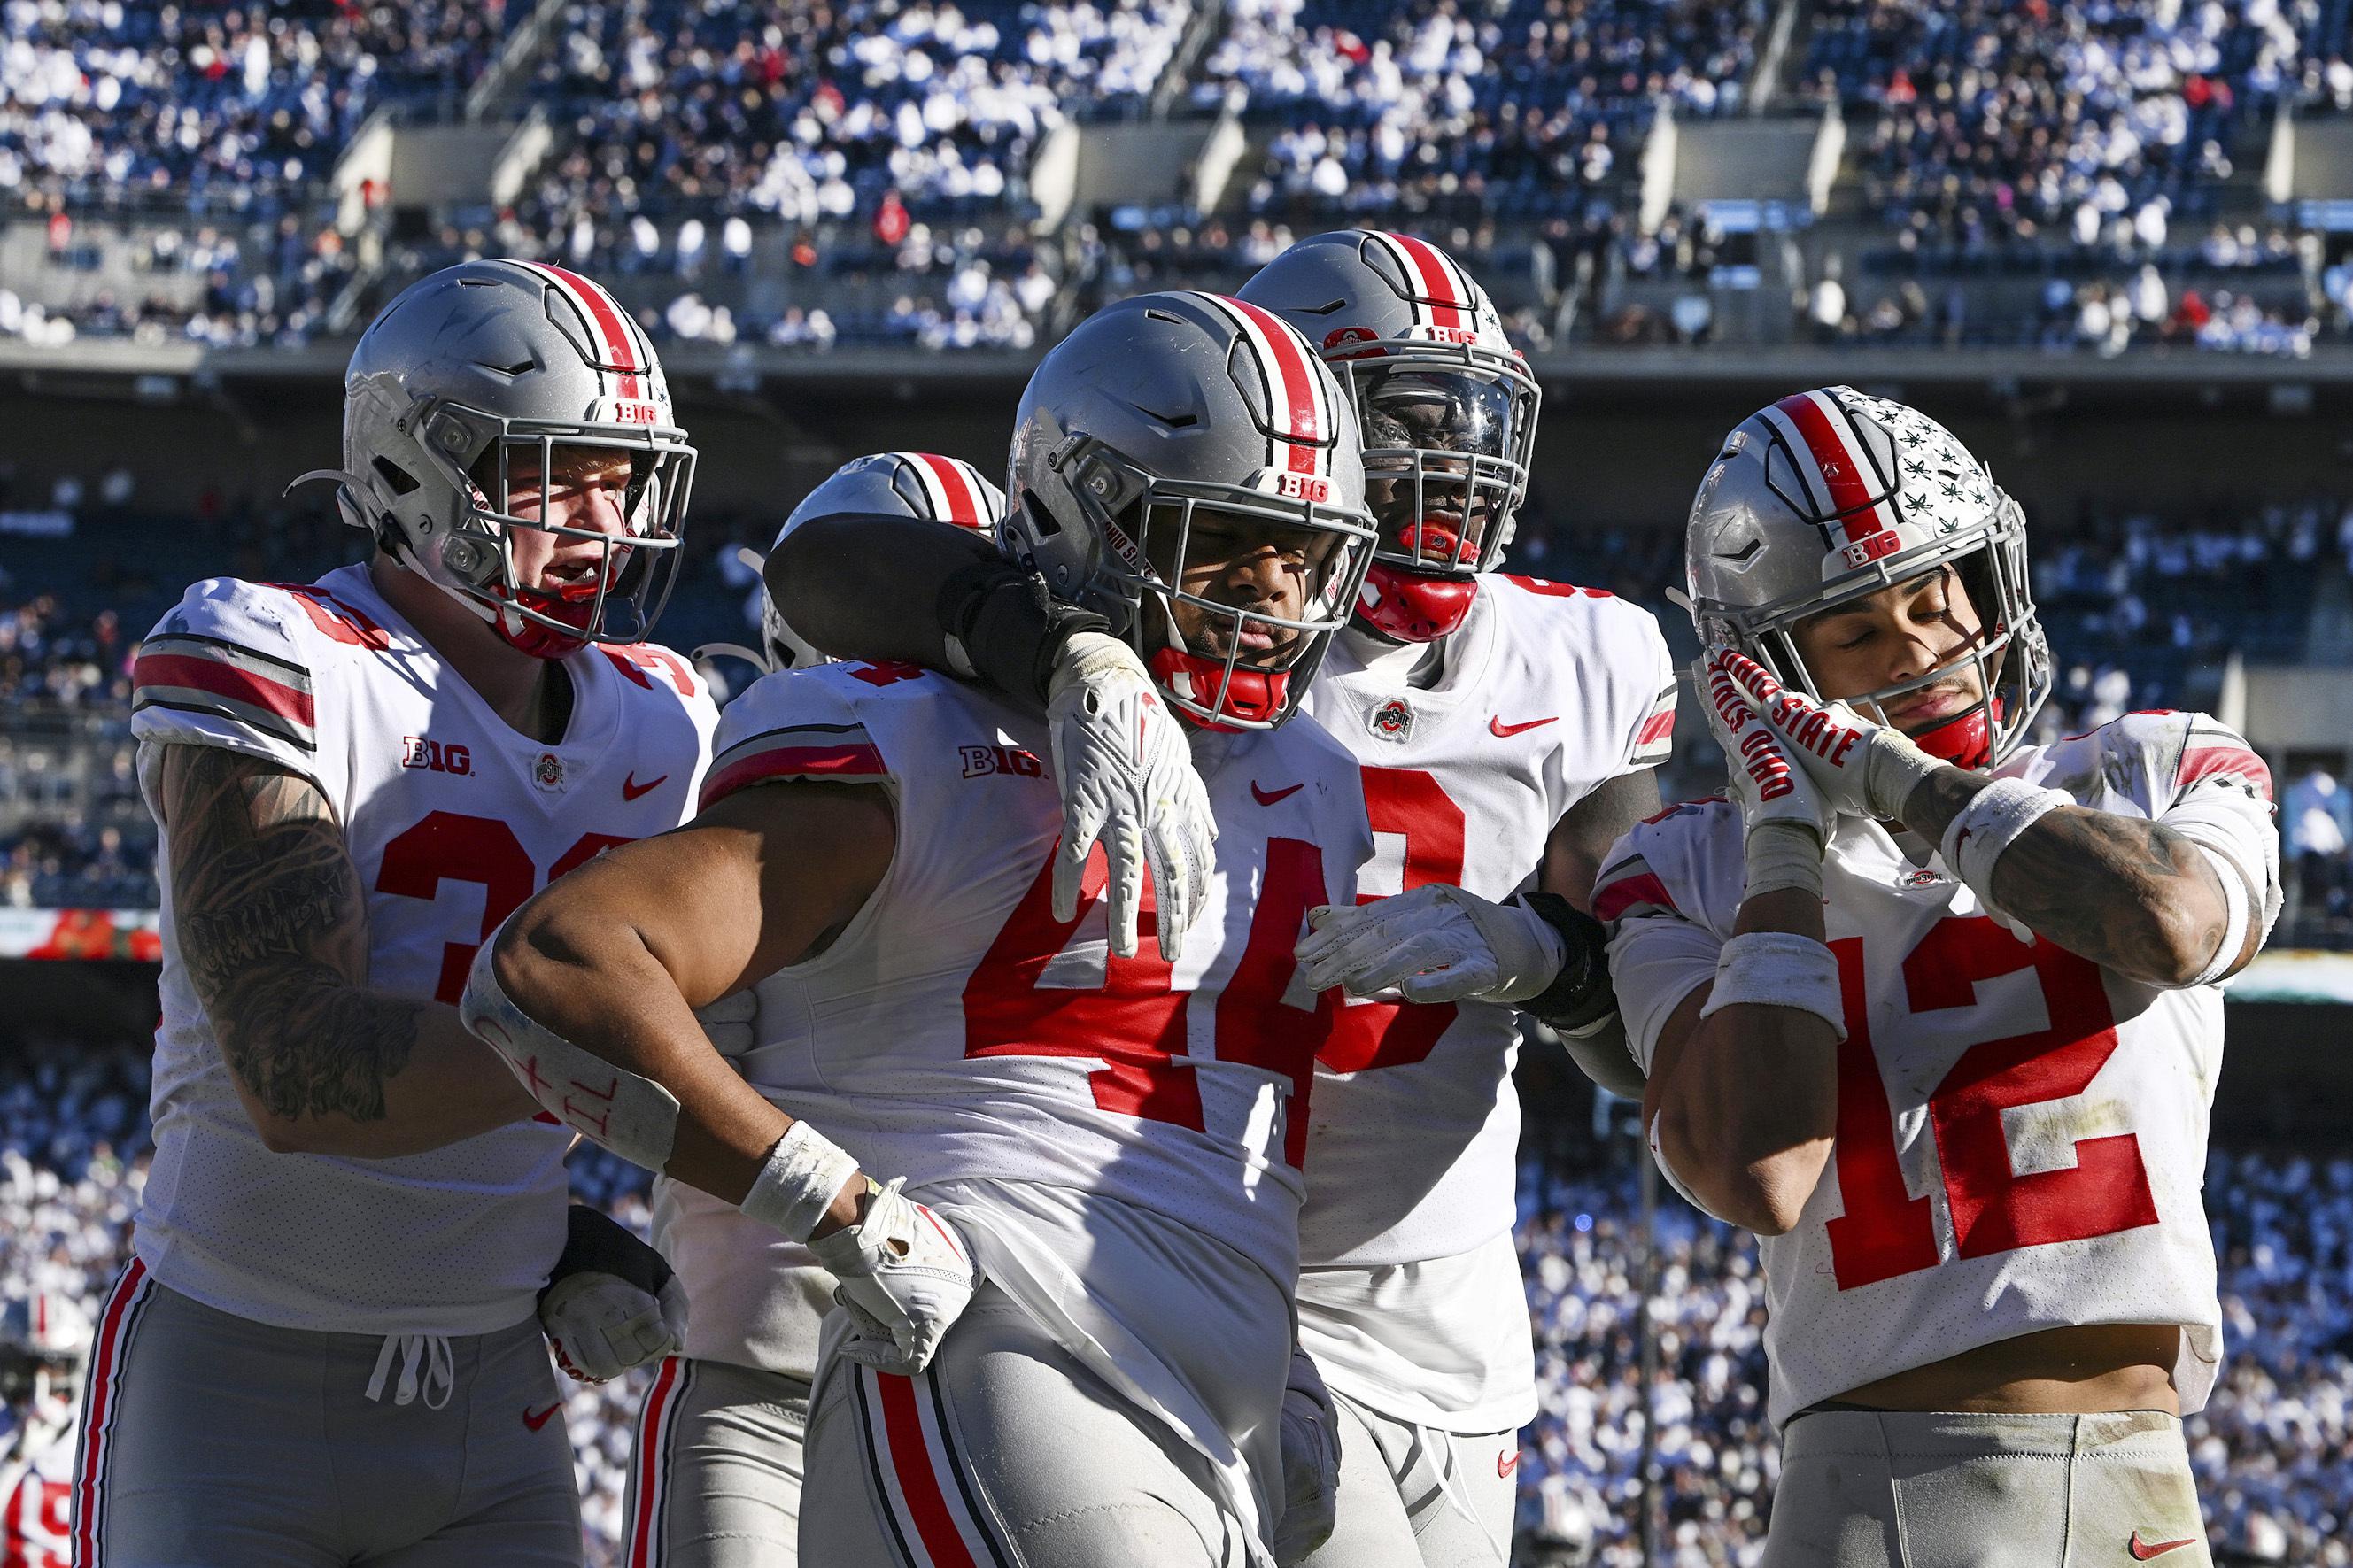 Ohio State dogged by Michigan loss during Peach Bowl prep